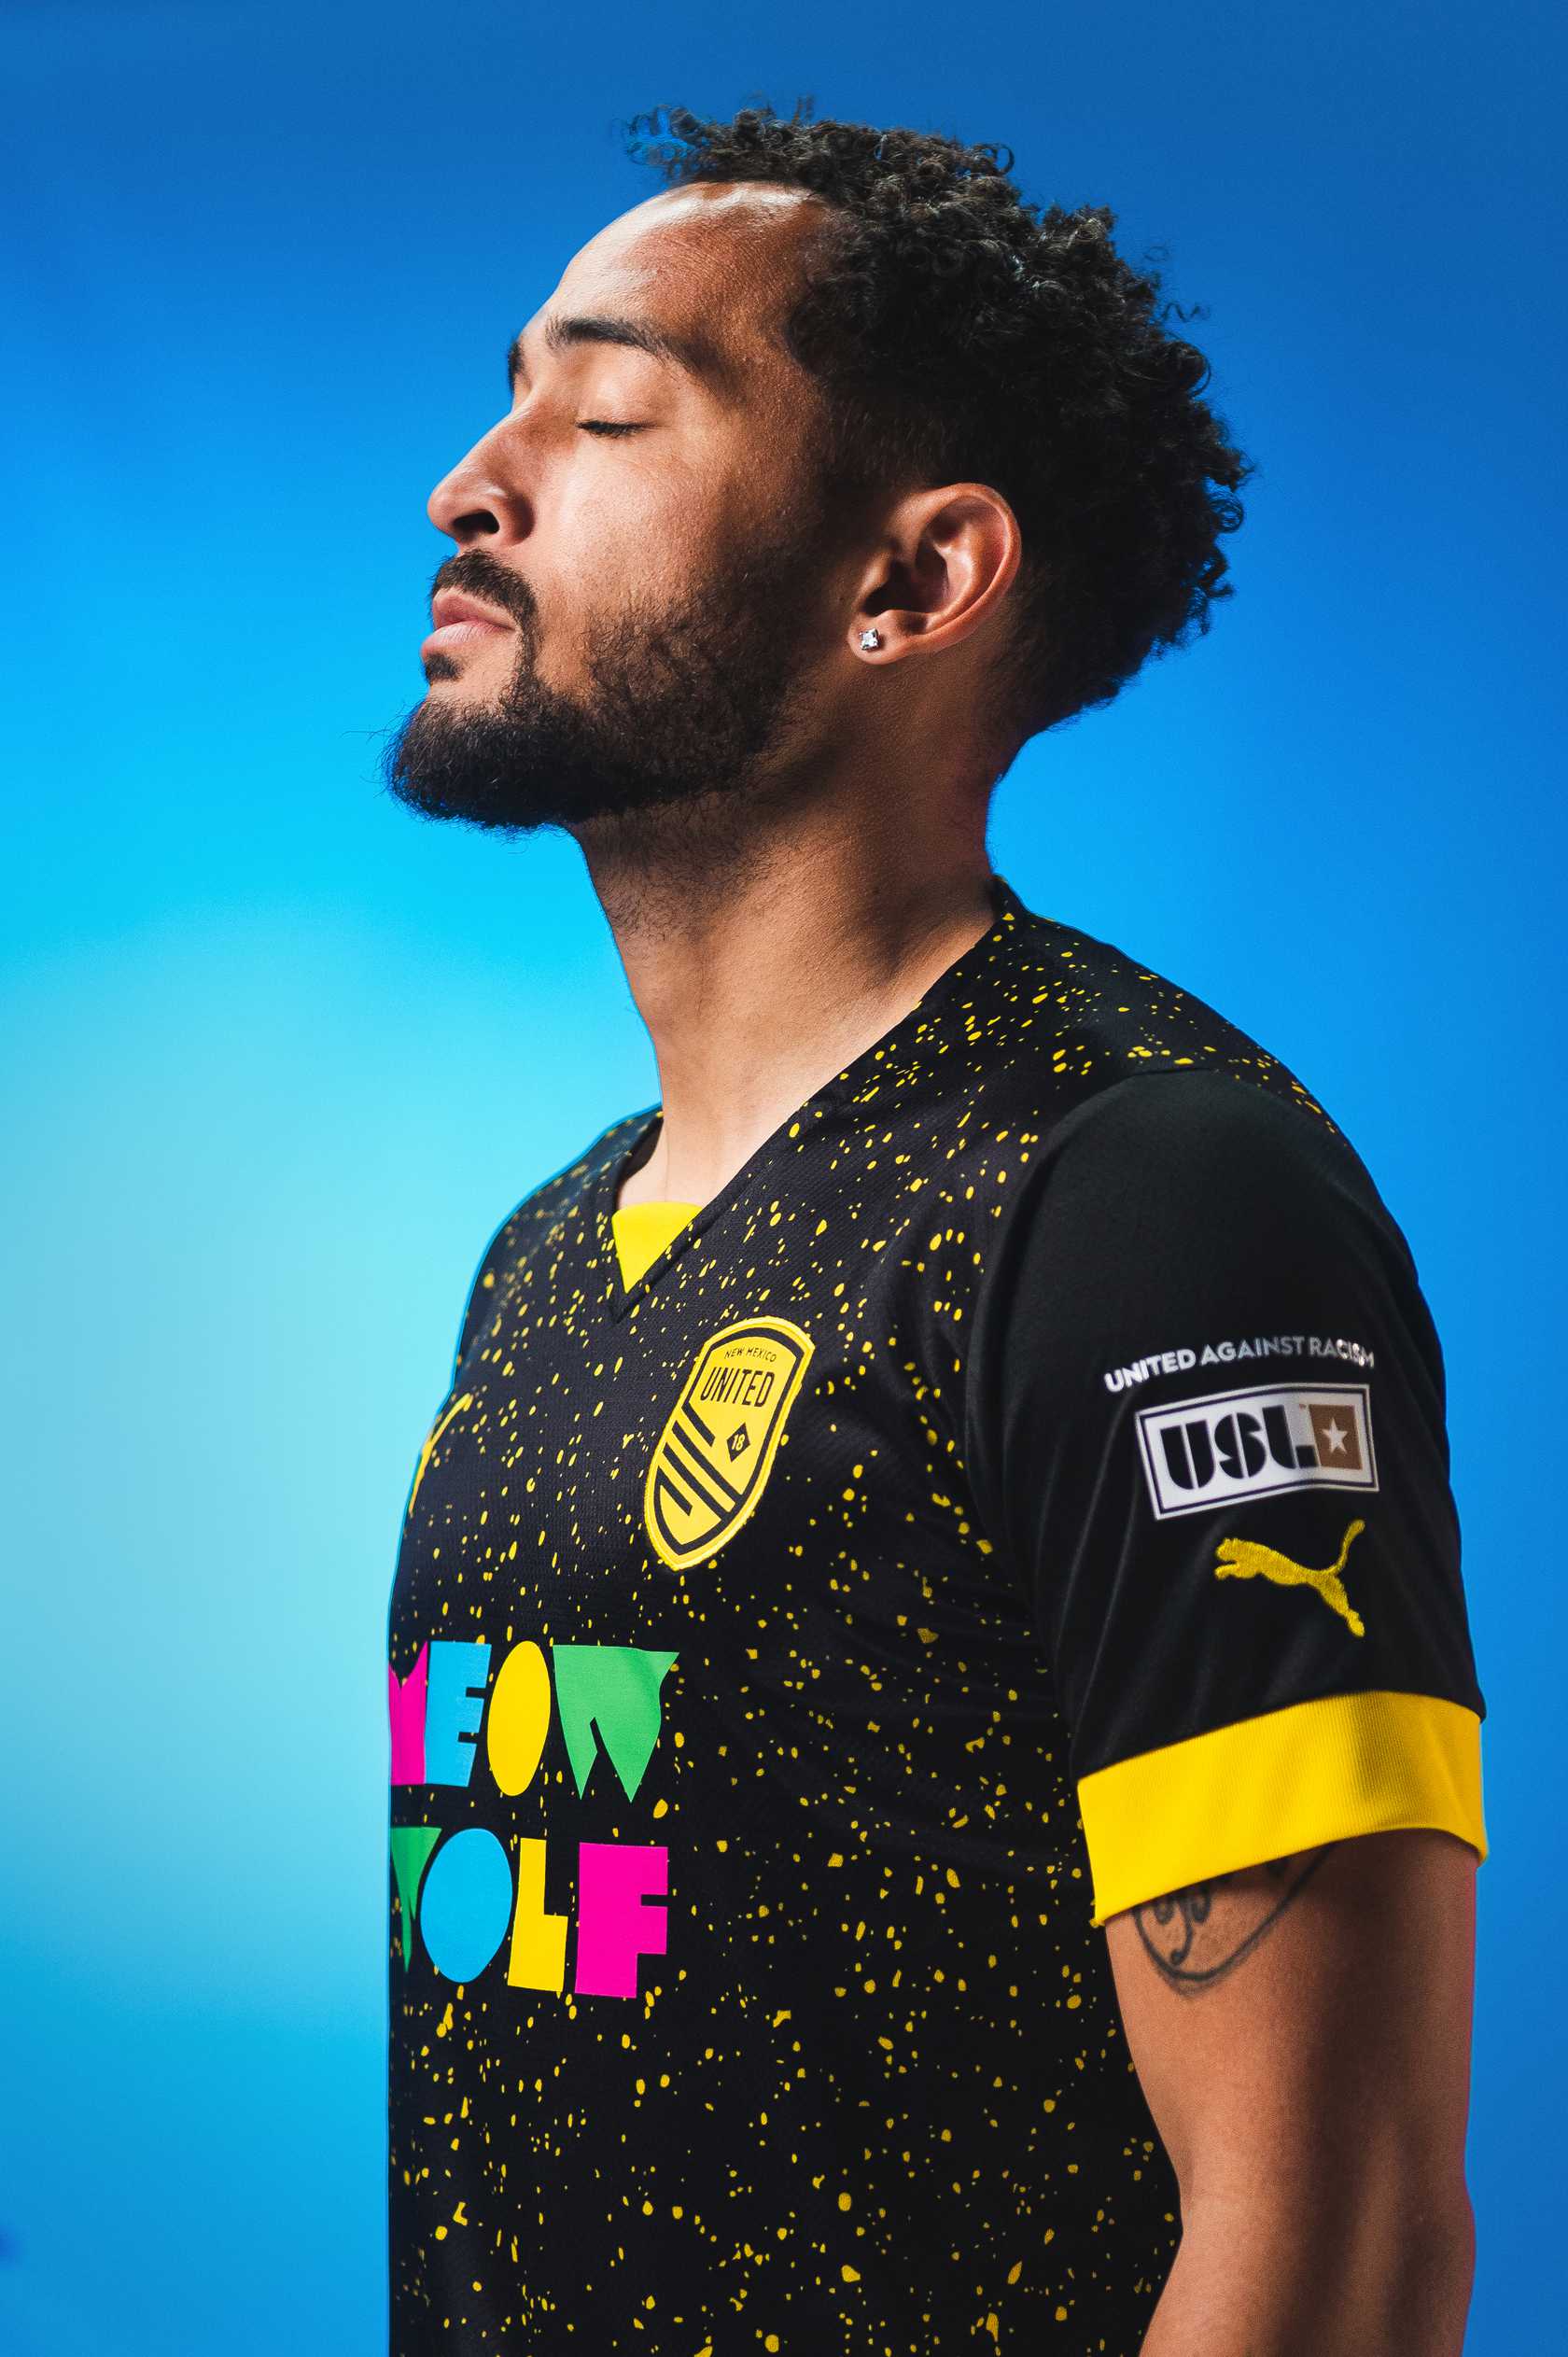 NM United x Meow Wolf Jersey 2023 - Meow Wolf Shop